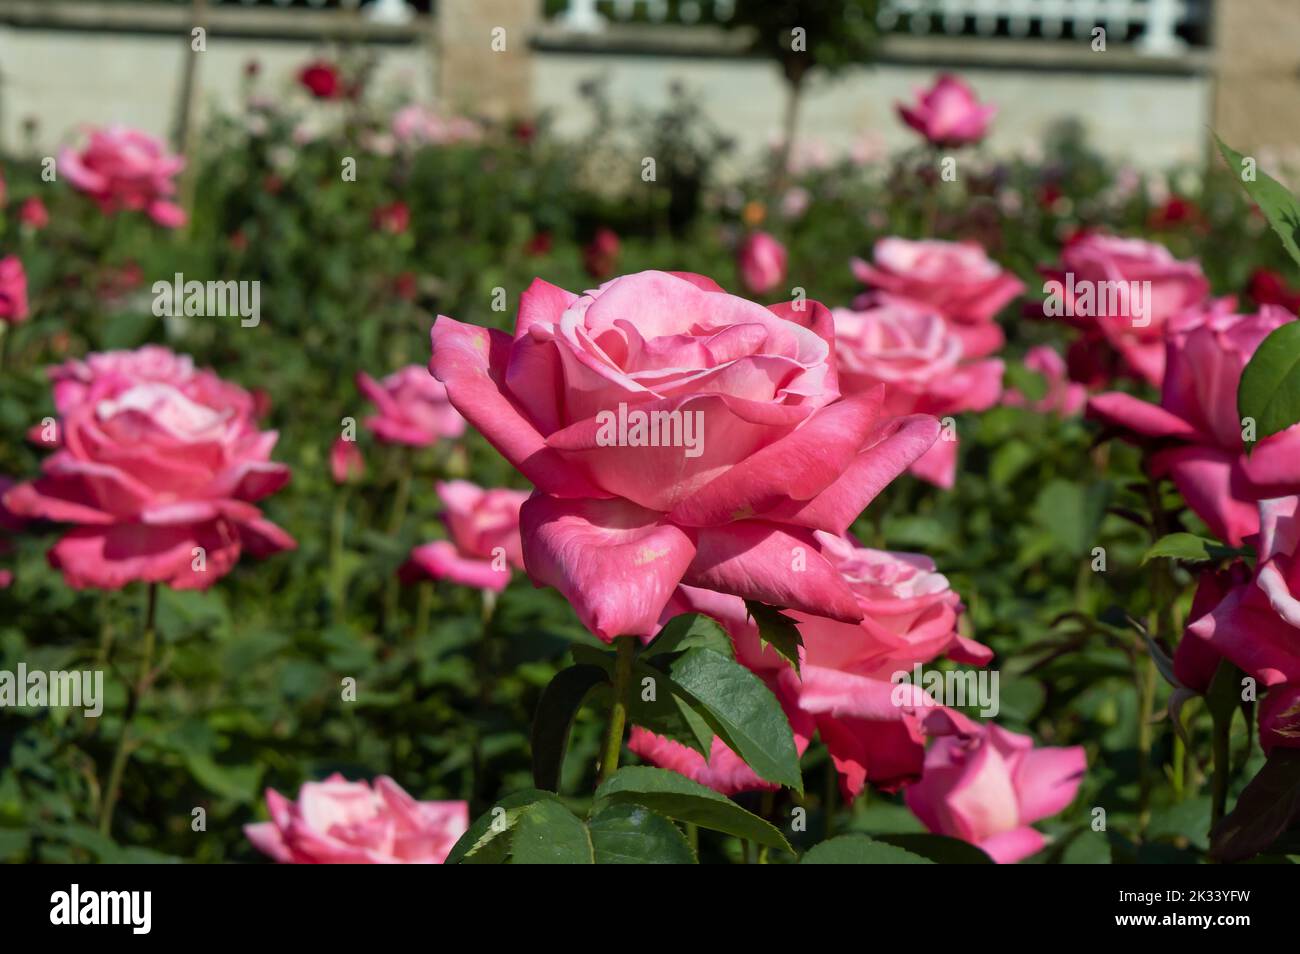 Roses Blue River Pink roses in the park garden Stock Photo